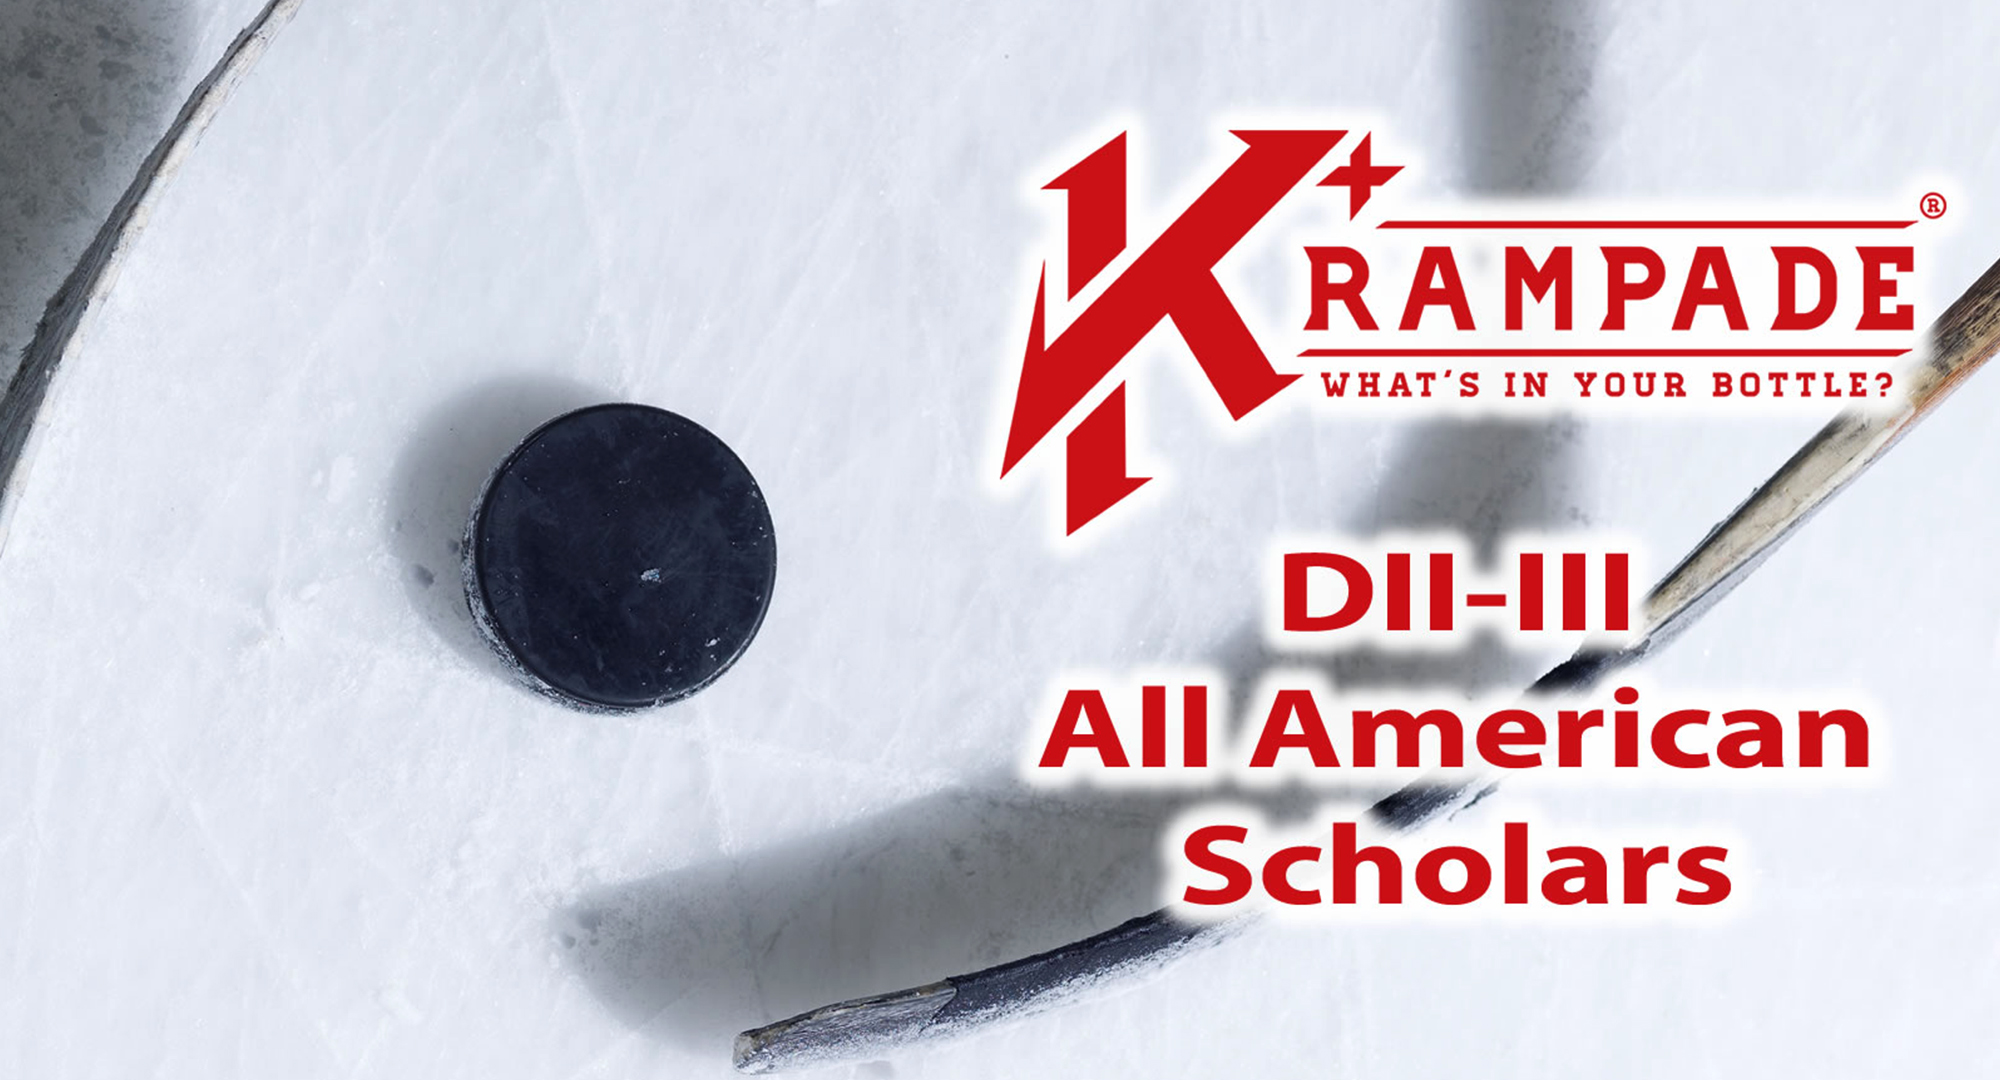 Adam Brown, Ben Luedtke, Brady O’Brien, Cole O'Connell  and  Hanson O'Leary all earned AHCA Krampade All-American Scholar honors.